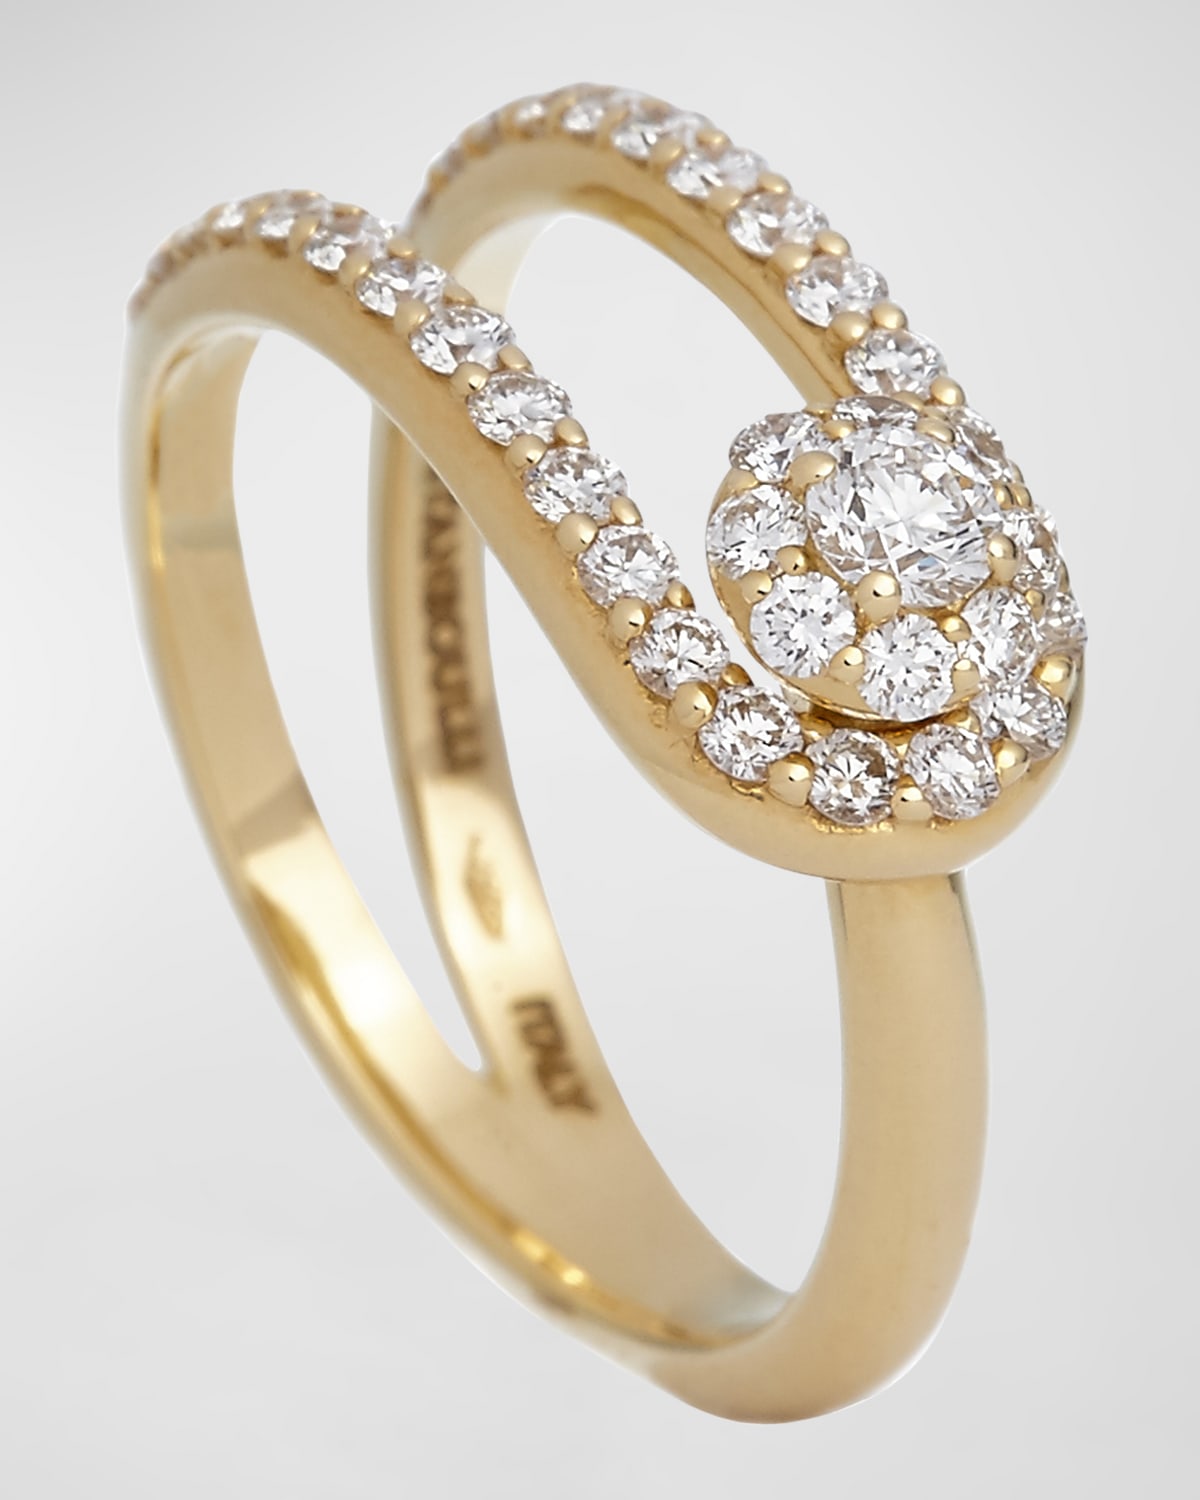 18K Yellow Gold Ring with Diamond Half, Size 7